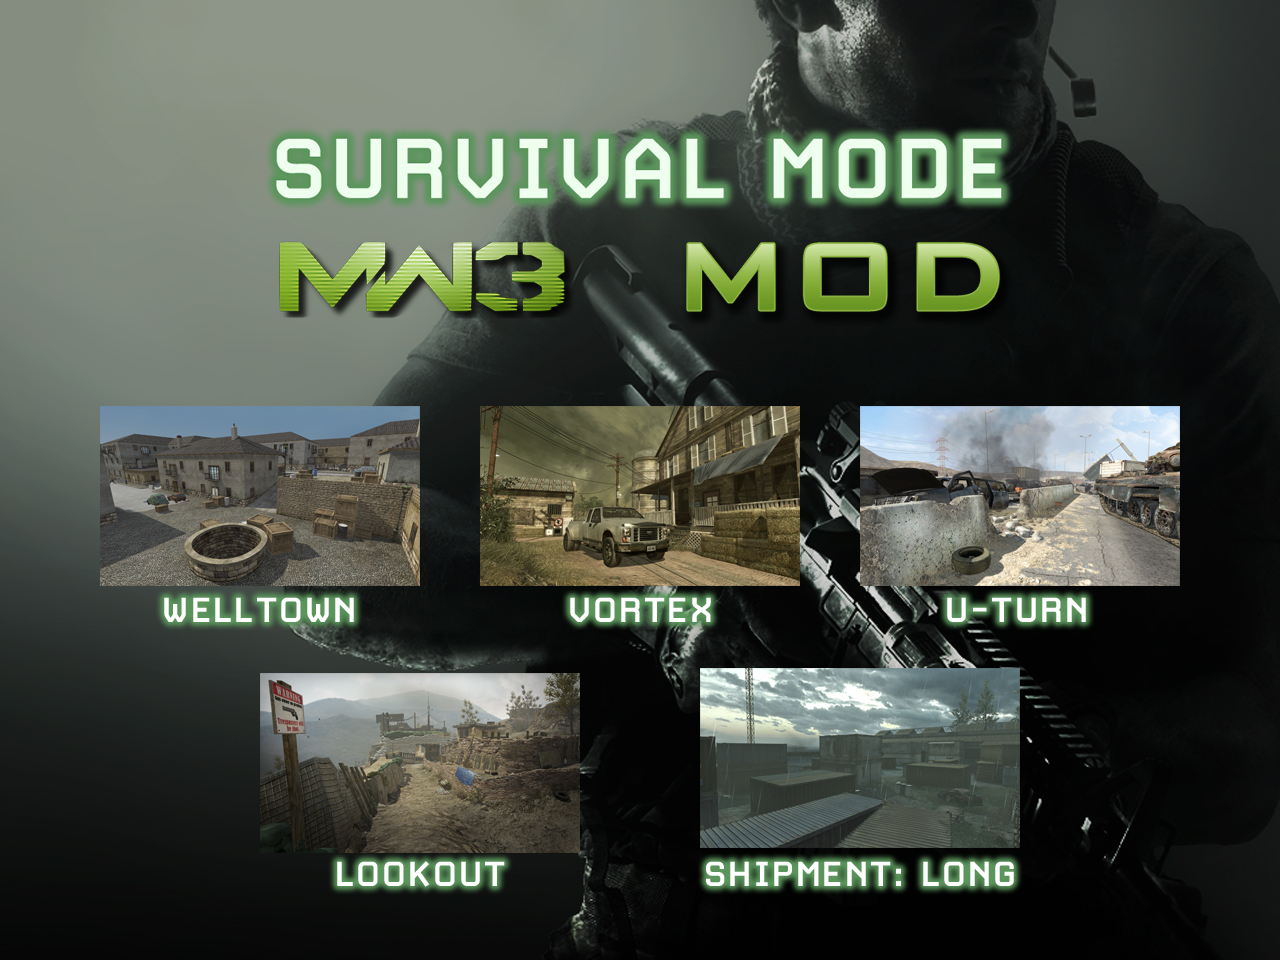 Call of Duty: Modern Warfare 3 - Spec Ops Survival - High quality stream  and download - Gamersyde